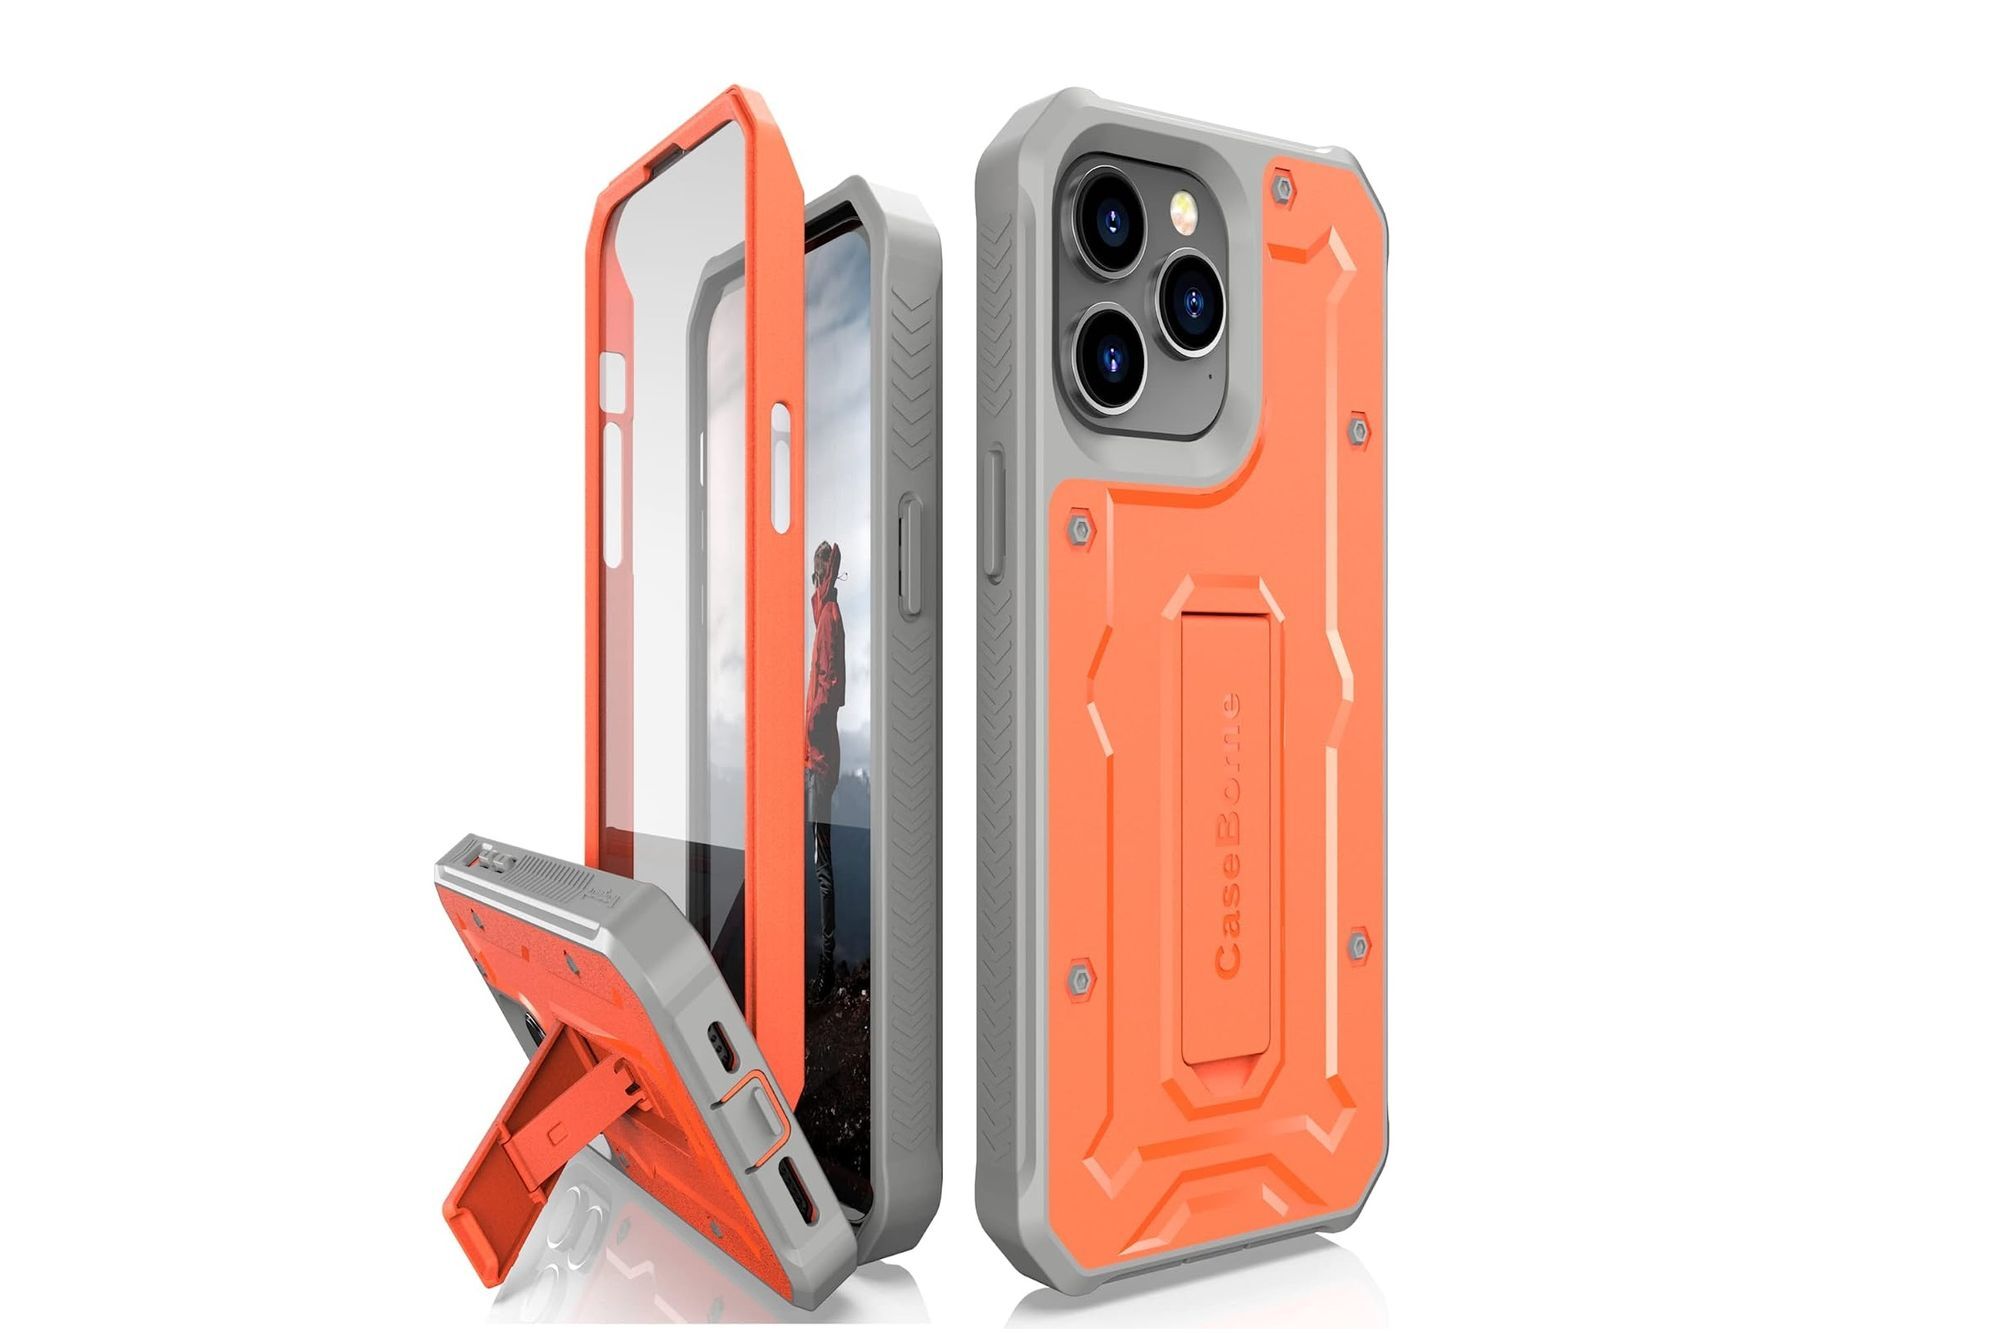 CaseBorne V iPhone 14 Pro Max case with military-grade protection - Best iPhone 14 Pro Max cases to buy right now - our top picks